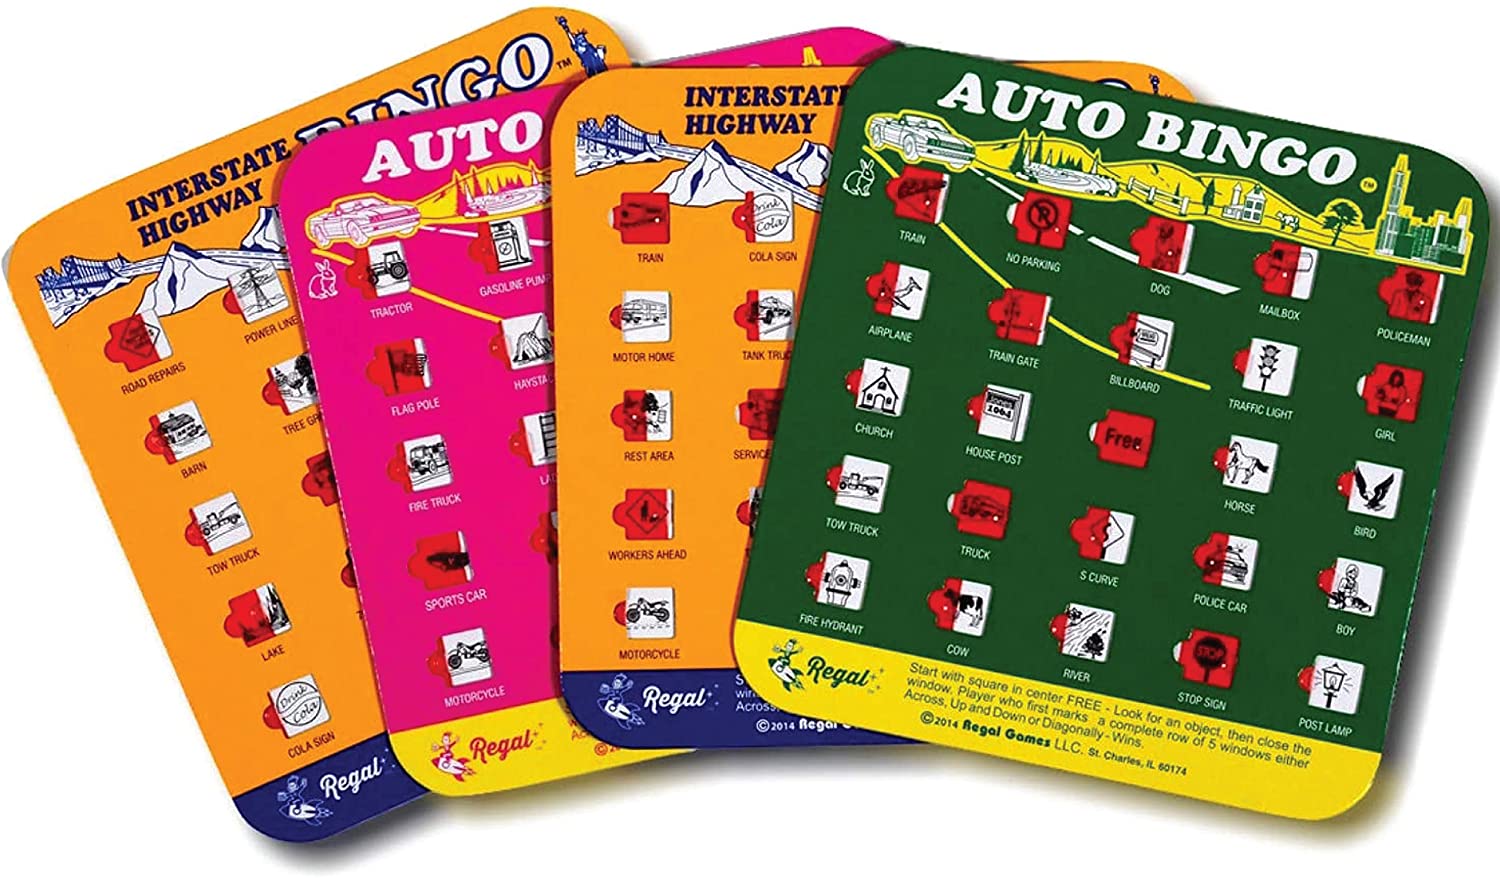 BRAND NEW 2019 SET OF 4 ROAD TRIP BINGO CARDS TOYSMITH TRAVEL/TRAVELLING GAME 